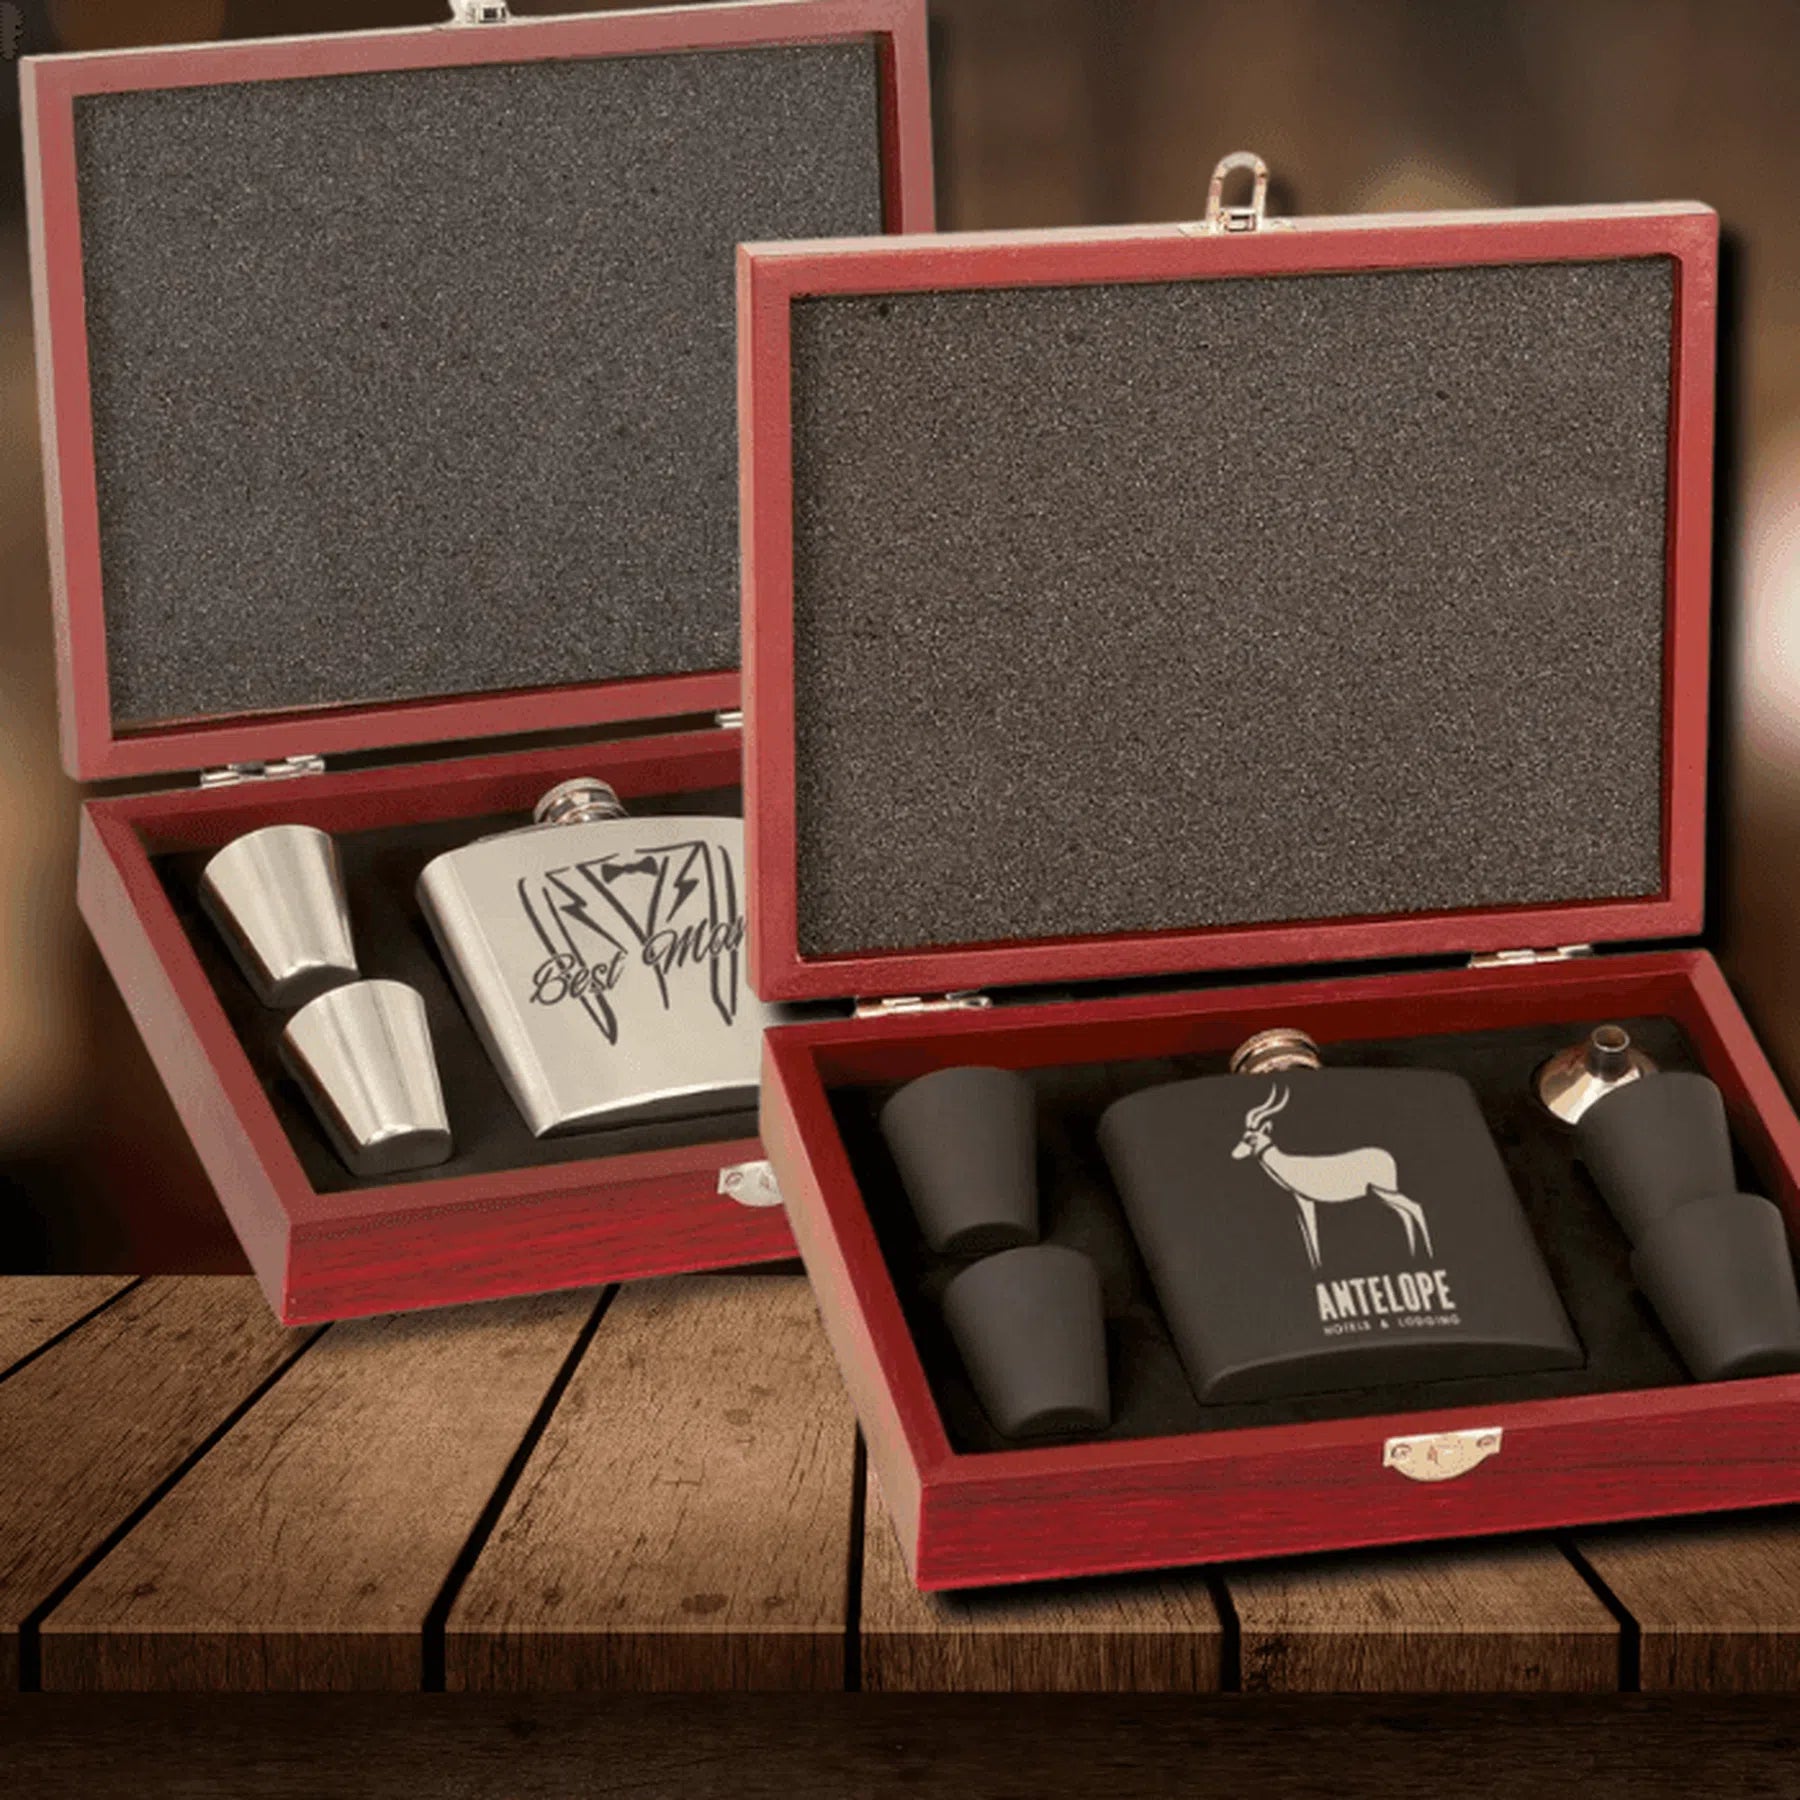 6 oz. Stainless Steel Flask Gift Set with Rosewood Finish Box